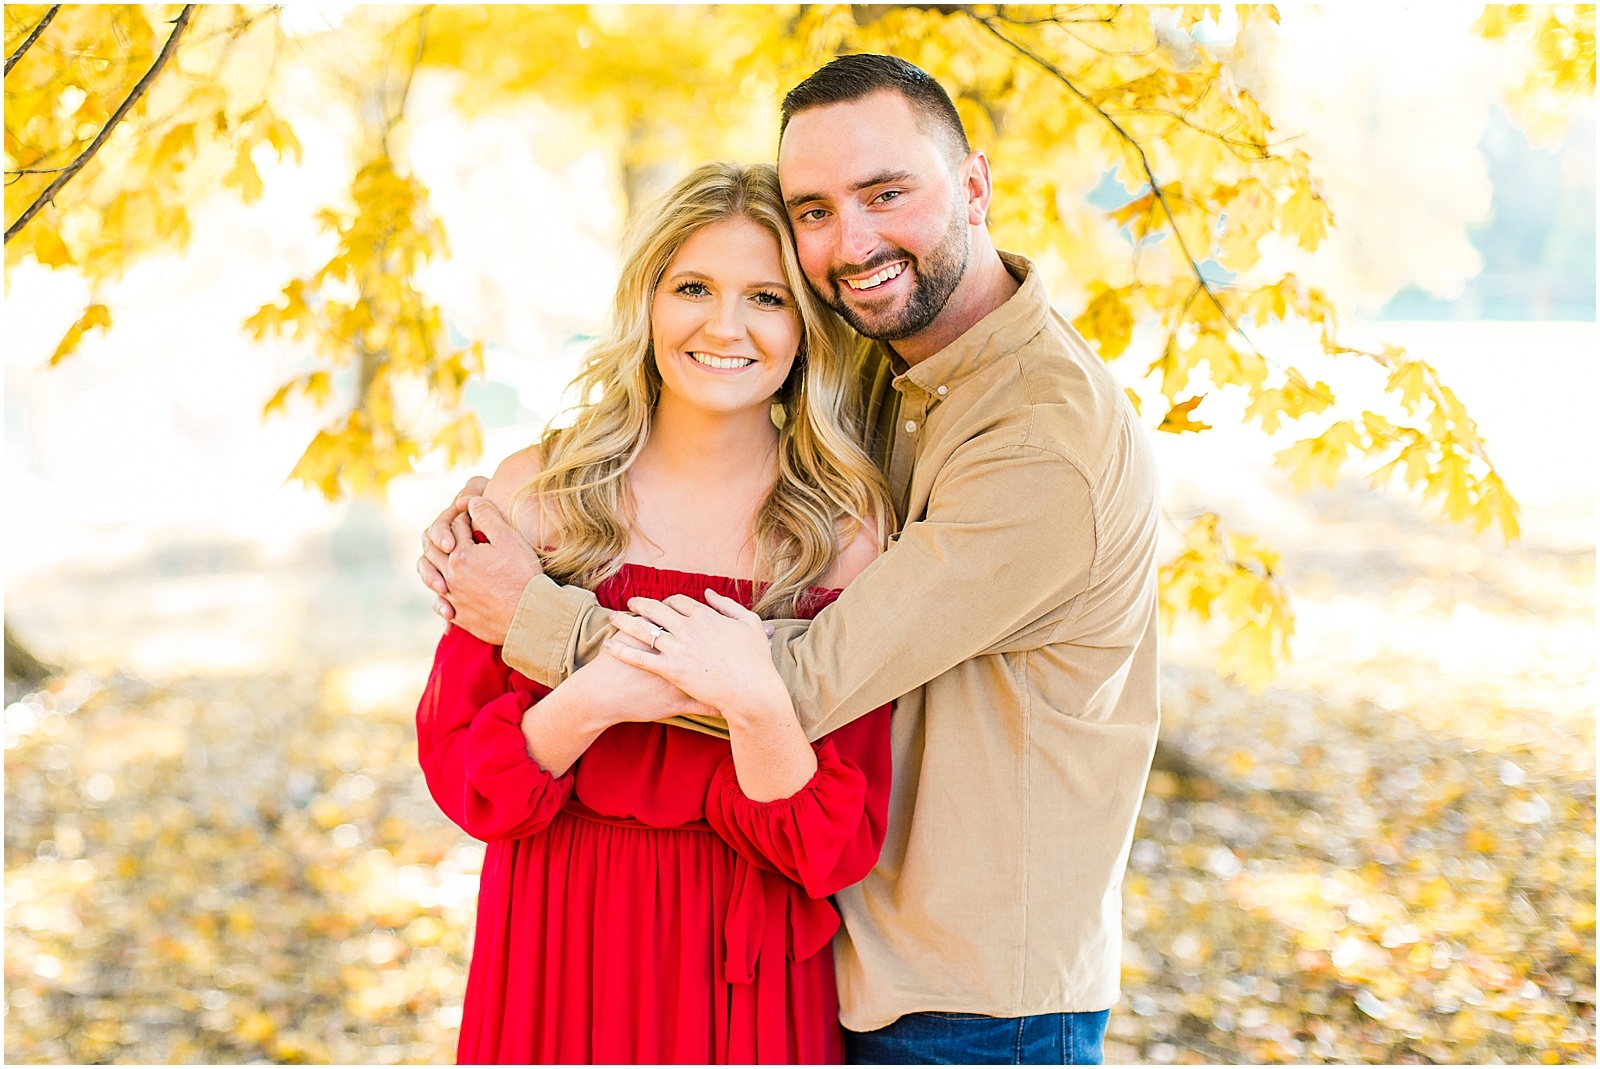 A Southern Indiana Engagement Session | Charleston and Erin | Bret and Brandie Photography033.jpg